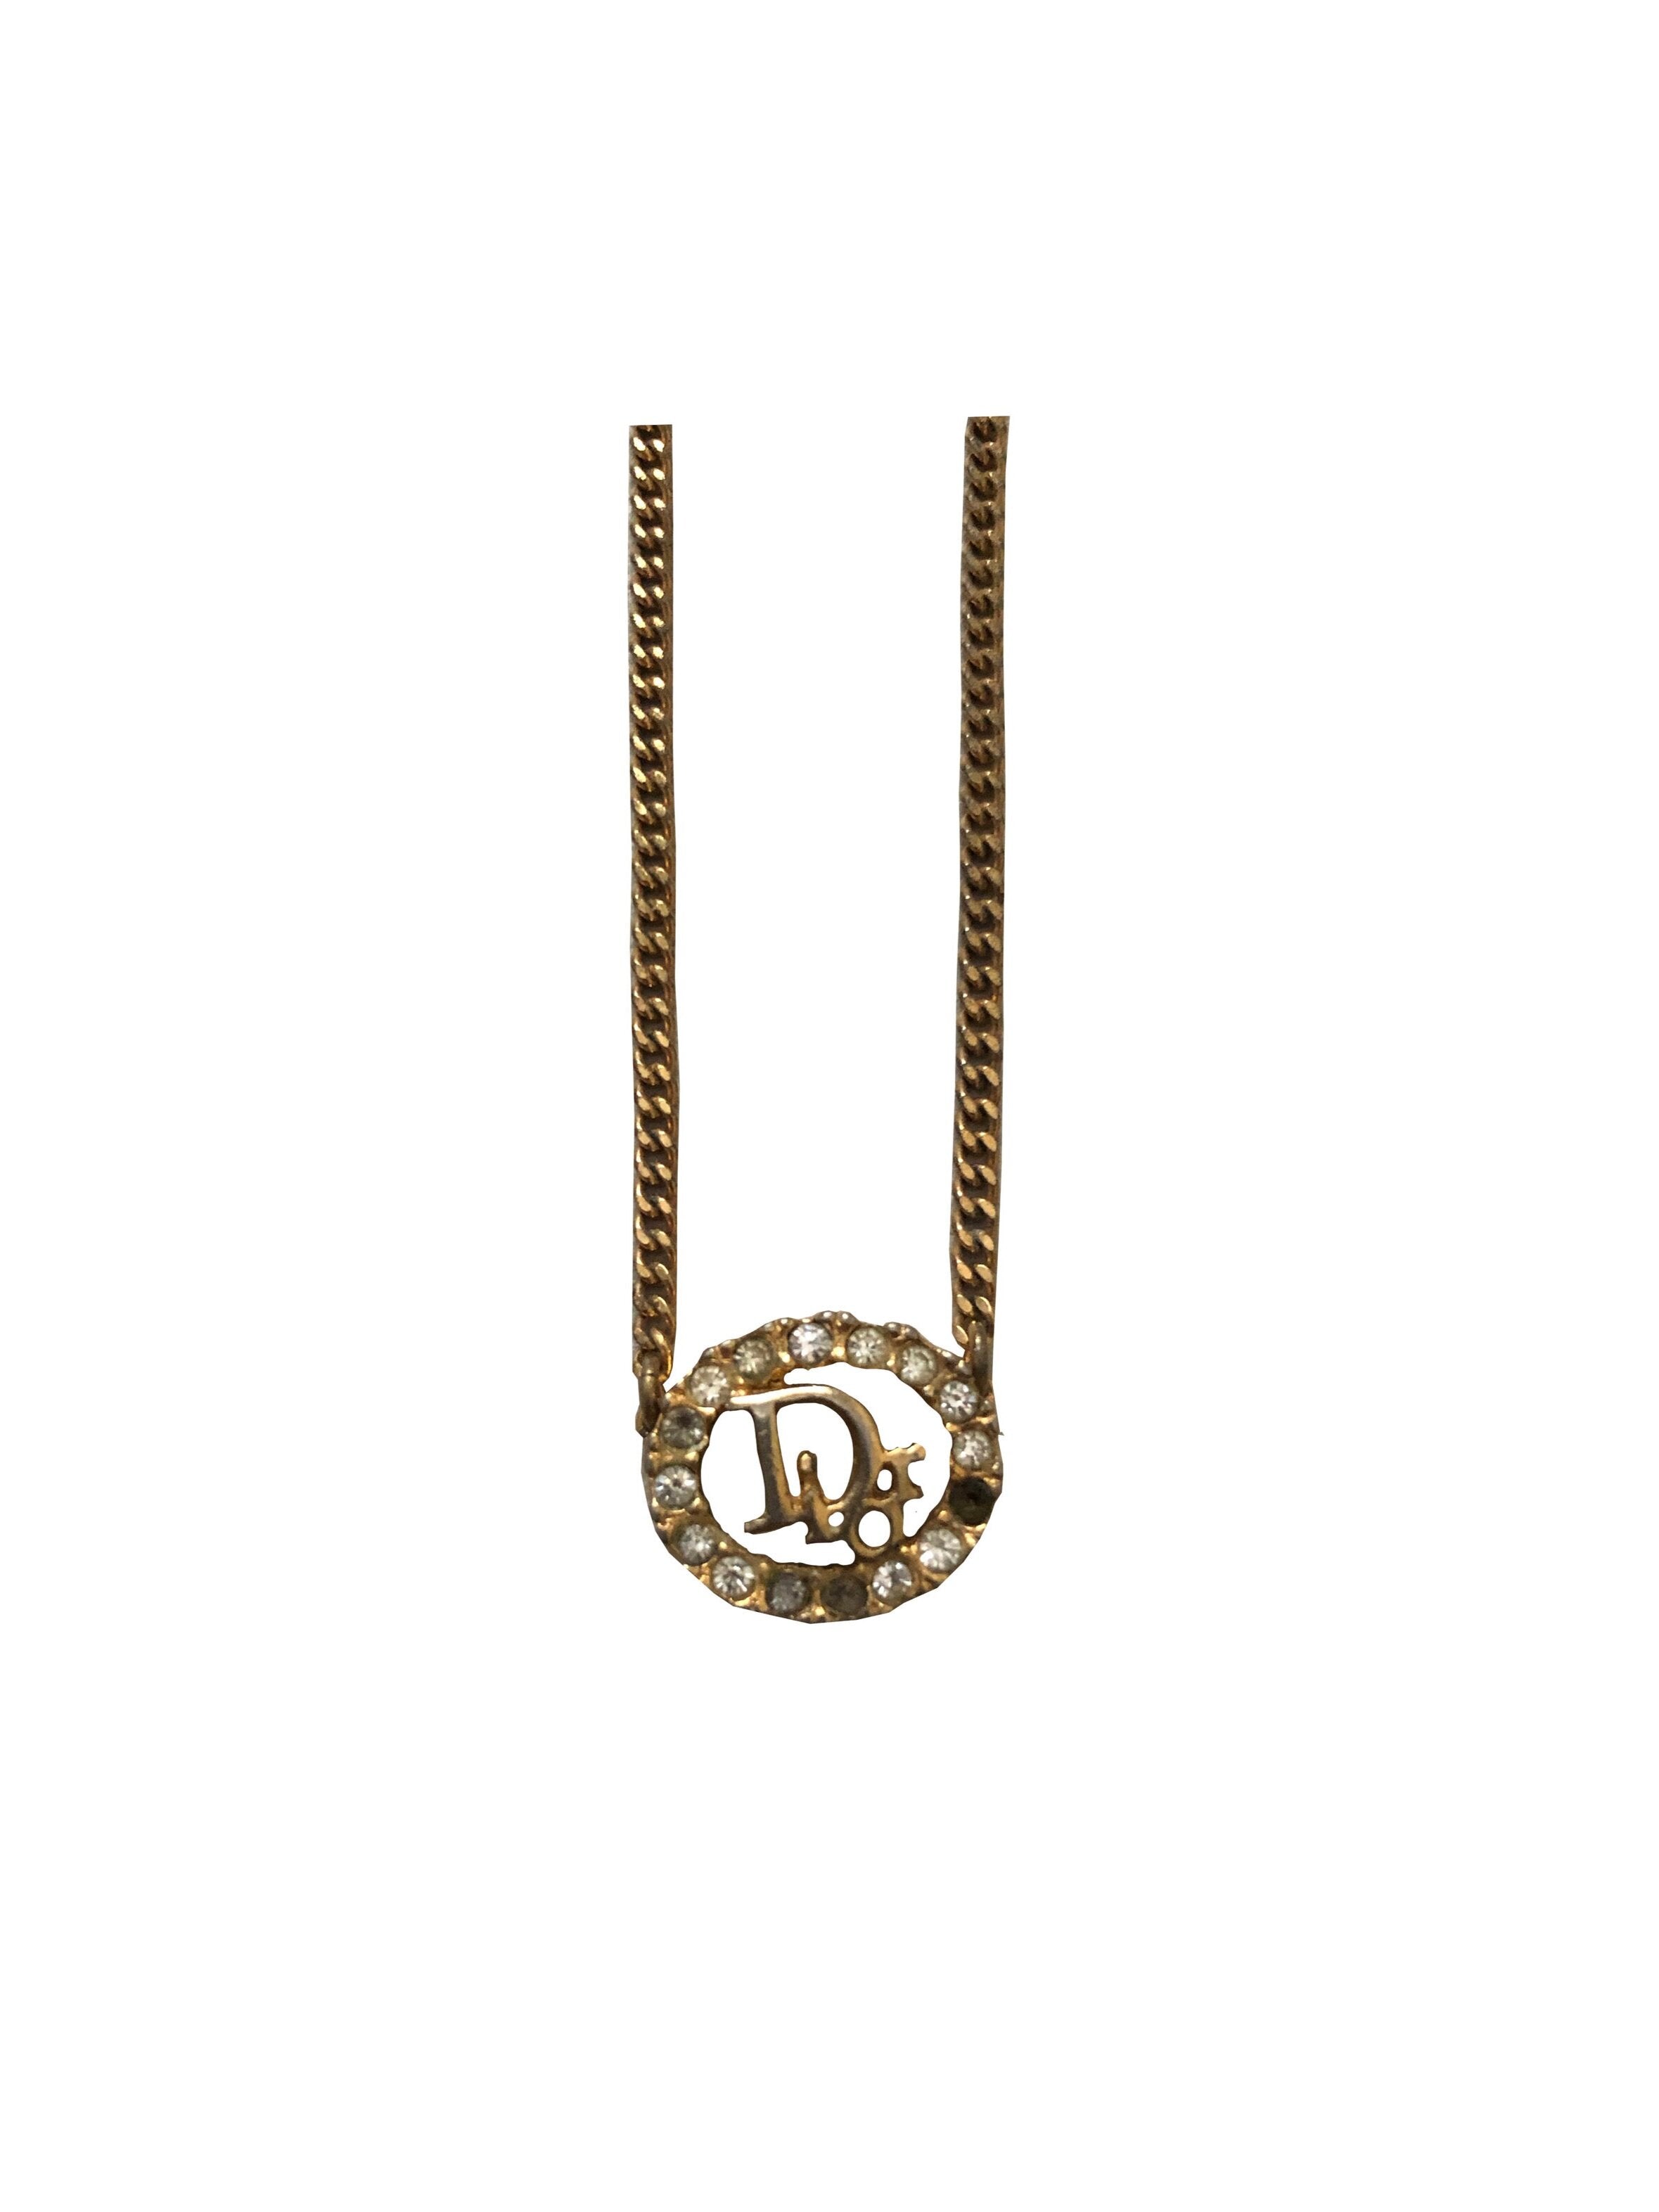 Christian Dior 2000s Gold Charm Necklace